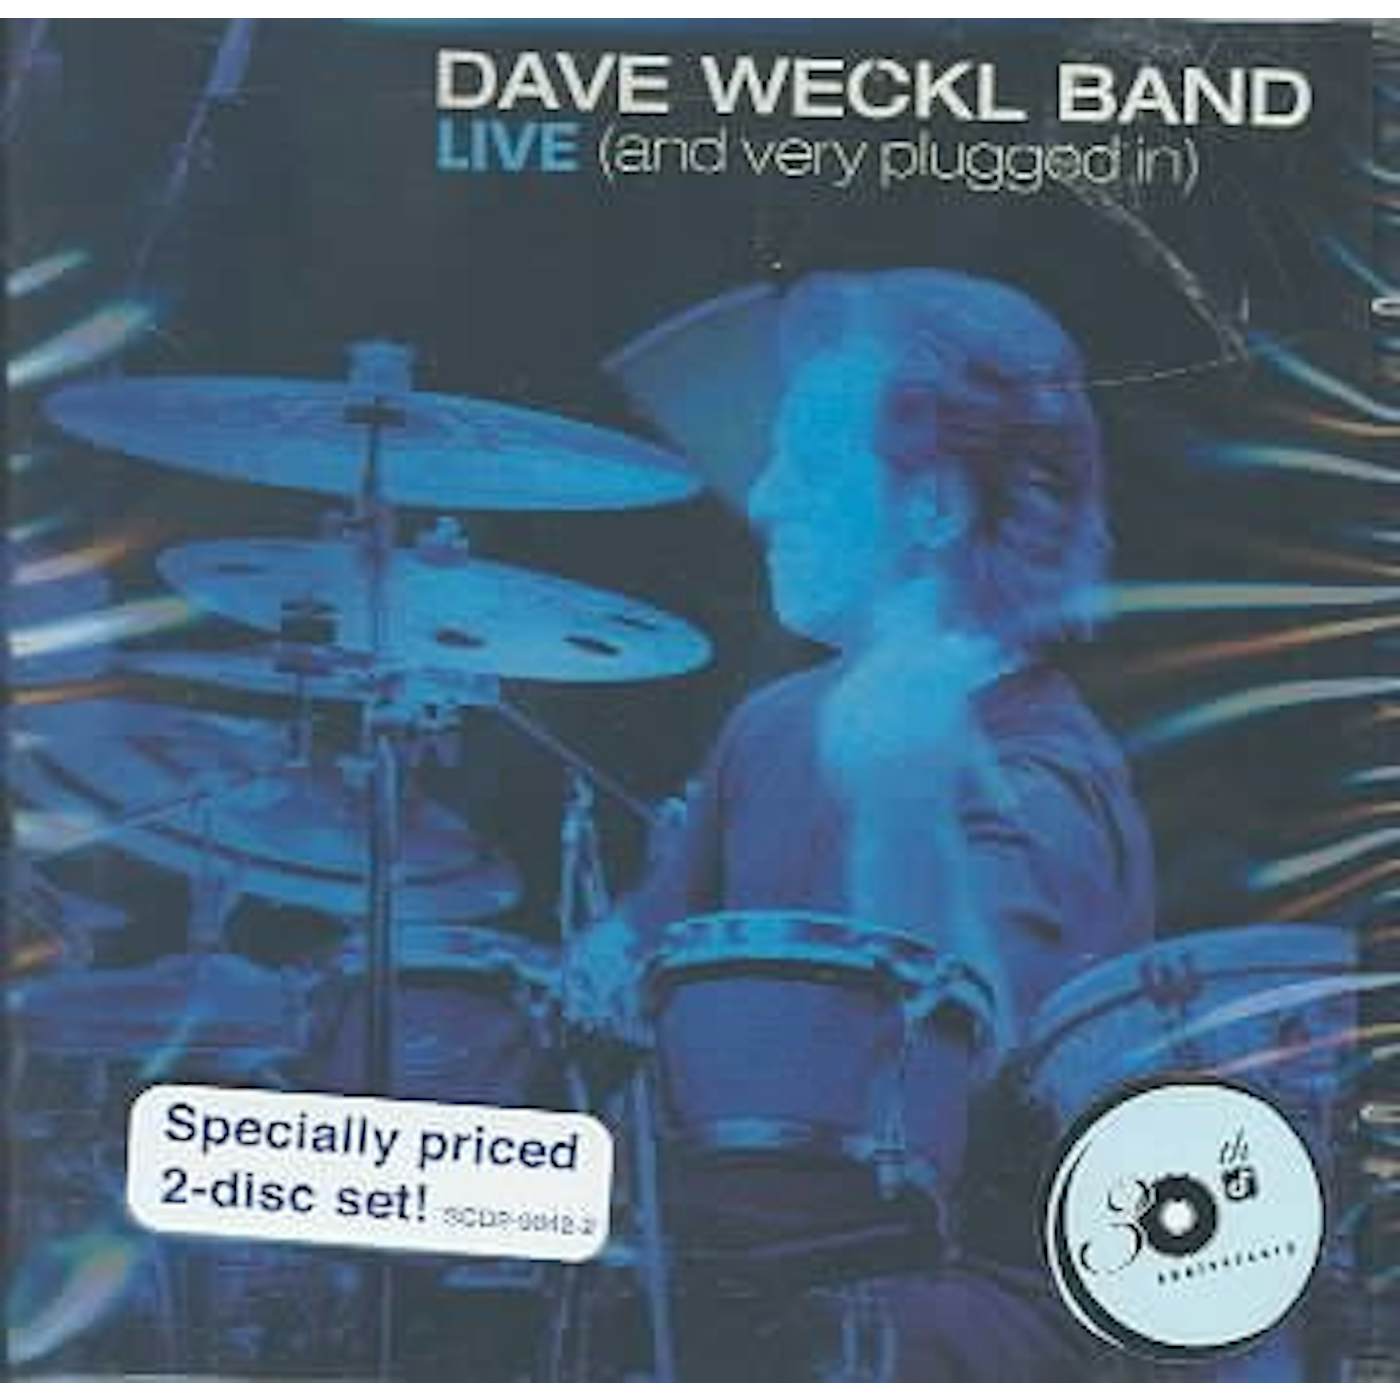 The Dave Weckl Band - Live (And Very Plugged In) CD